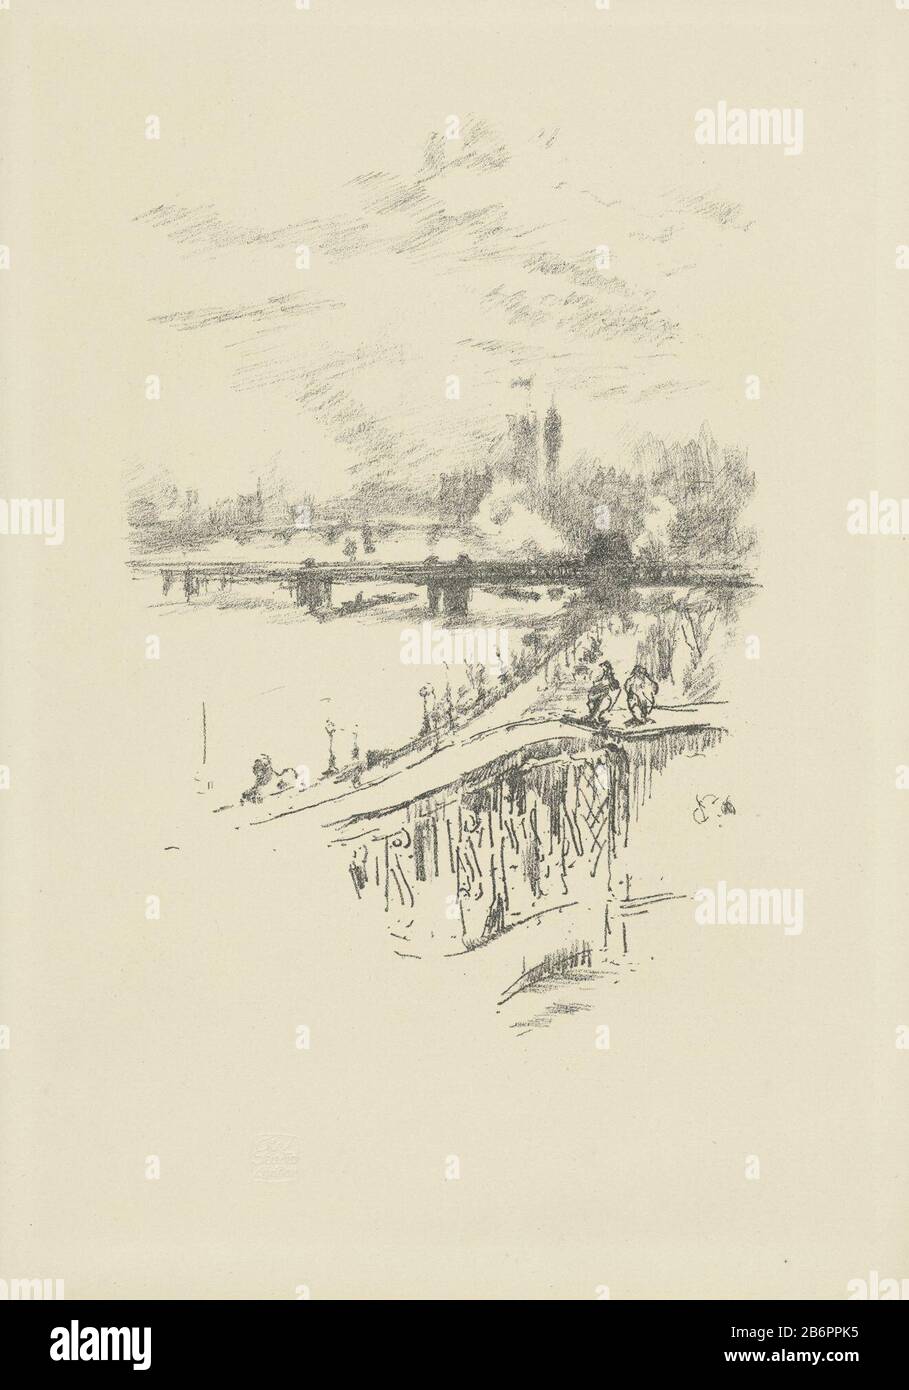 Gezicht op de Theems en Westminster Face on the river Thames towards Westminster from a balcony of the Savoy hotel. Manufacturer : printmaker James Abbott McNeill Whistler (listed building) printer: Thomas Robert Wayuitgever: the Studio (listed property) Place manufacture: London Date: 1896 Physical features: lithography equipment : paper technique: lithography (technique) Dimensions: sheet: h 284 mm × W 200 mmToelichtingGepubliceerd in tijdschritf the Studio in June 1896. Subject: bridge in city across river, canal, etc. Stock Photo